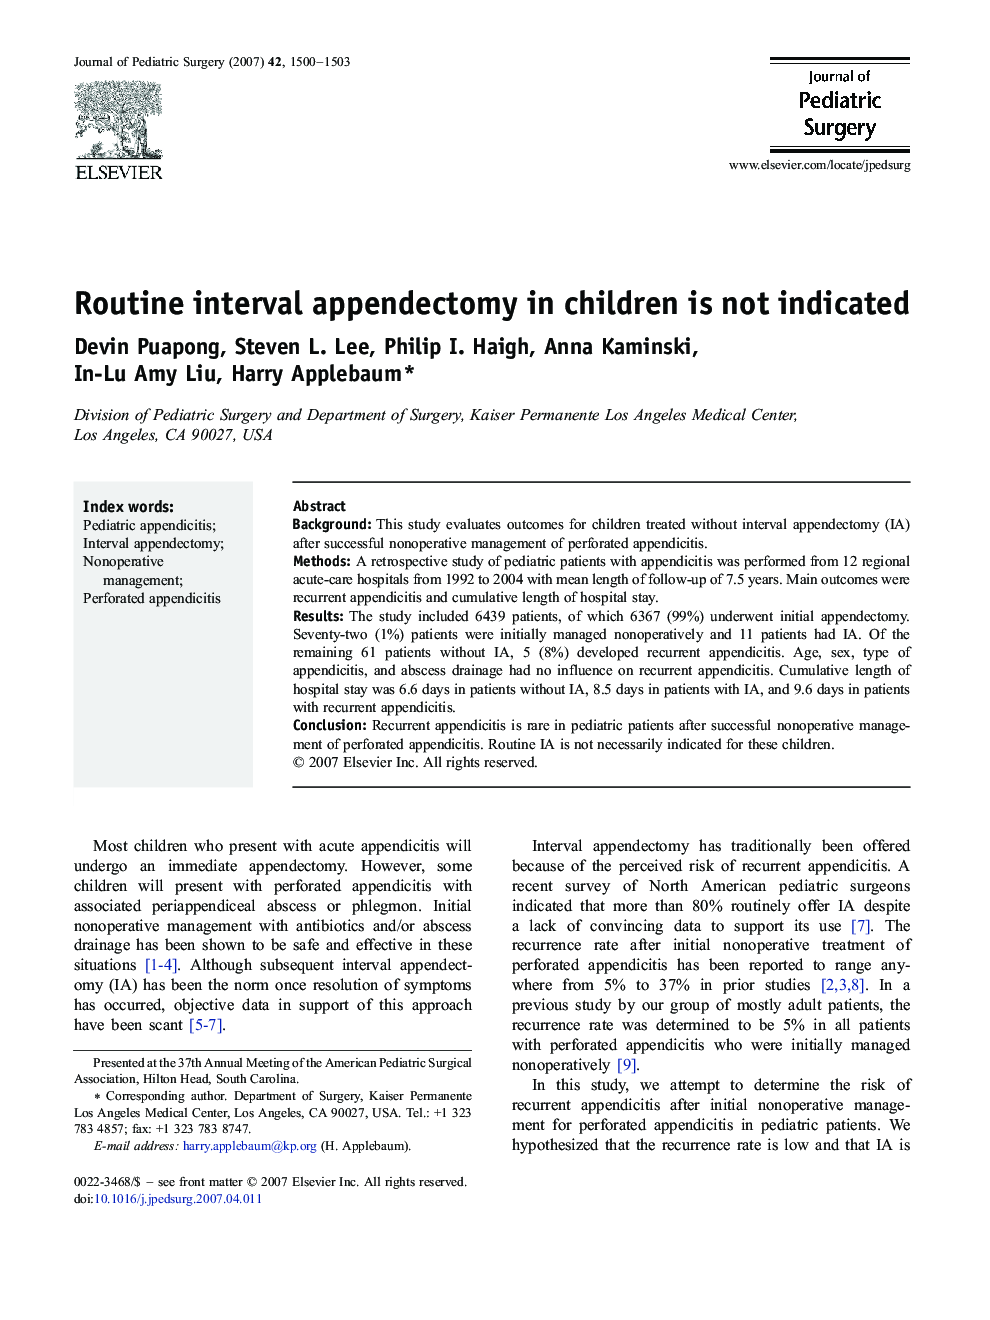 Routine interval appendectomy in children is not indicated 